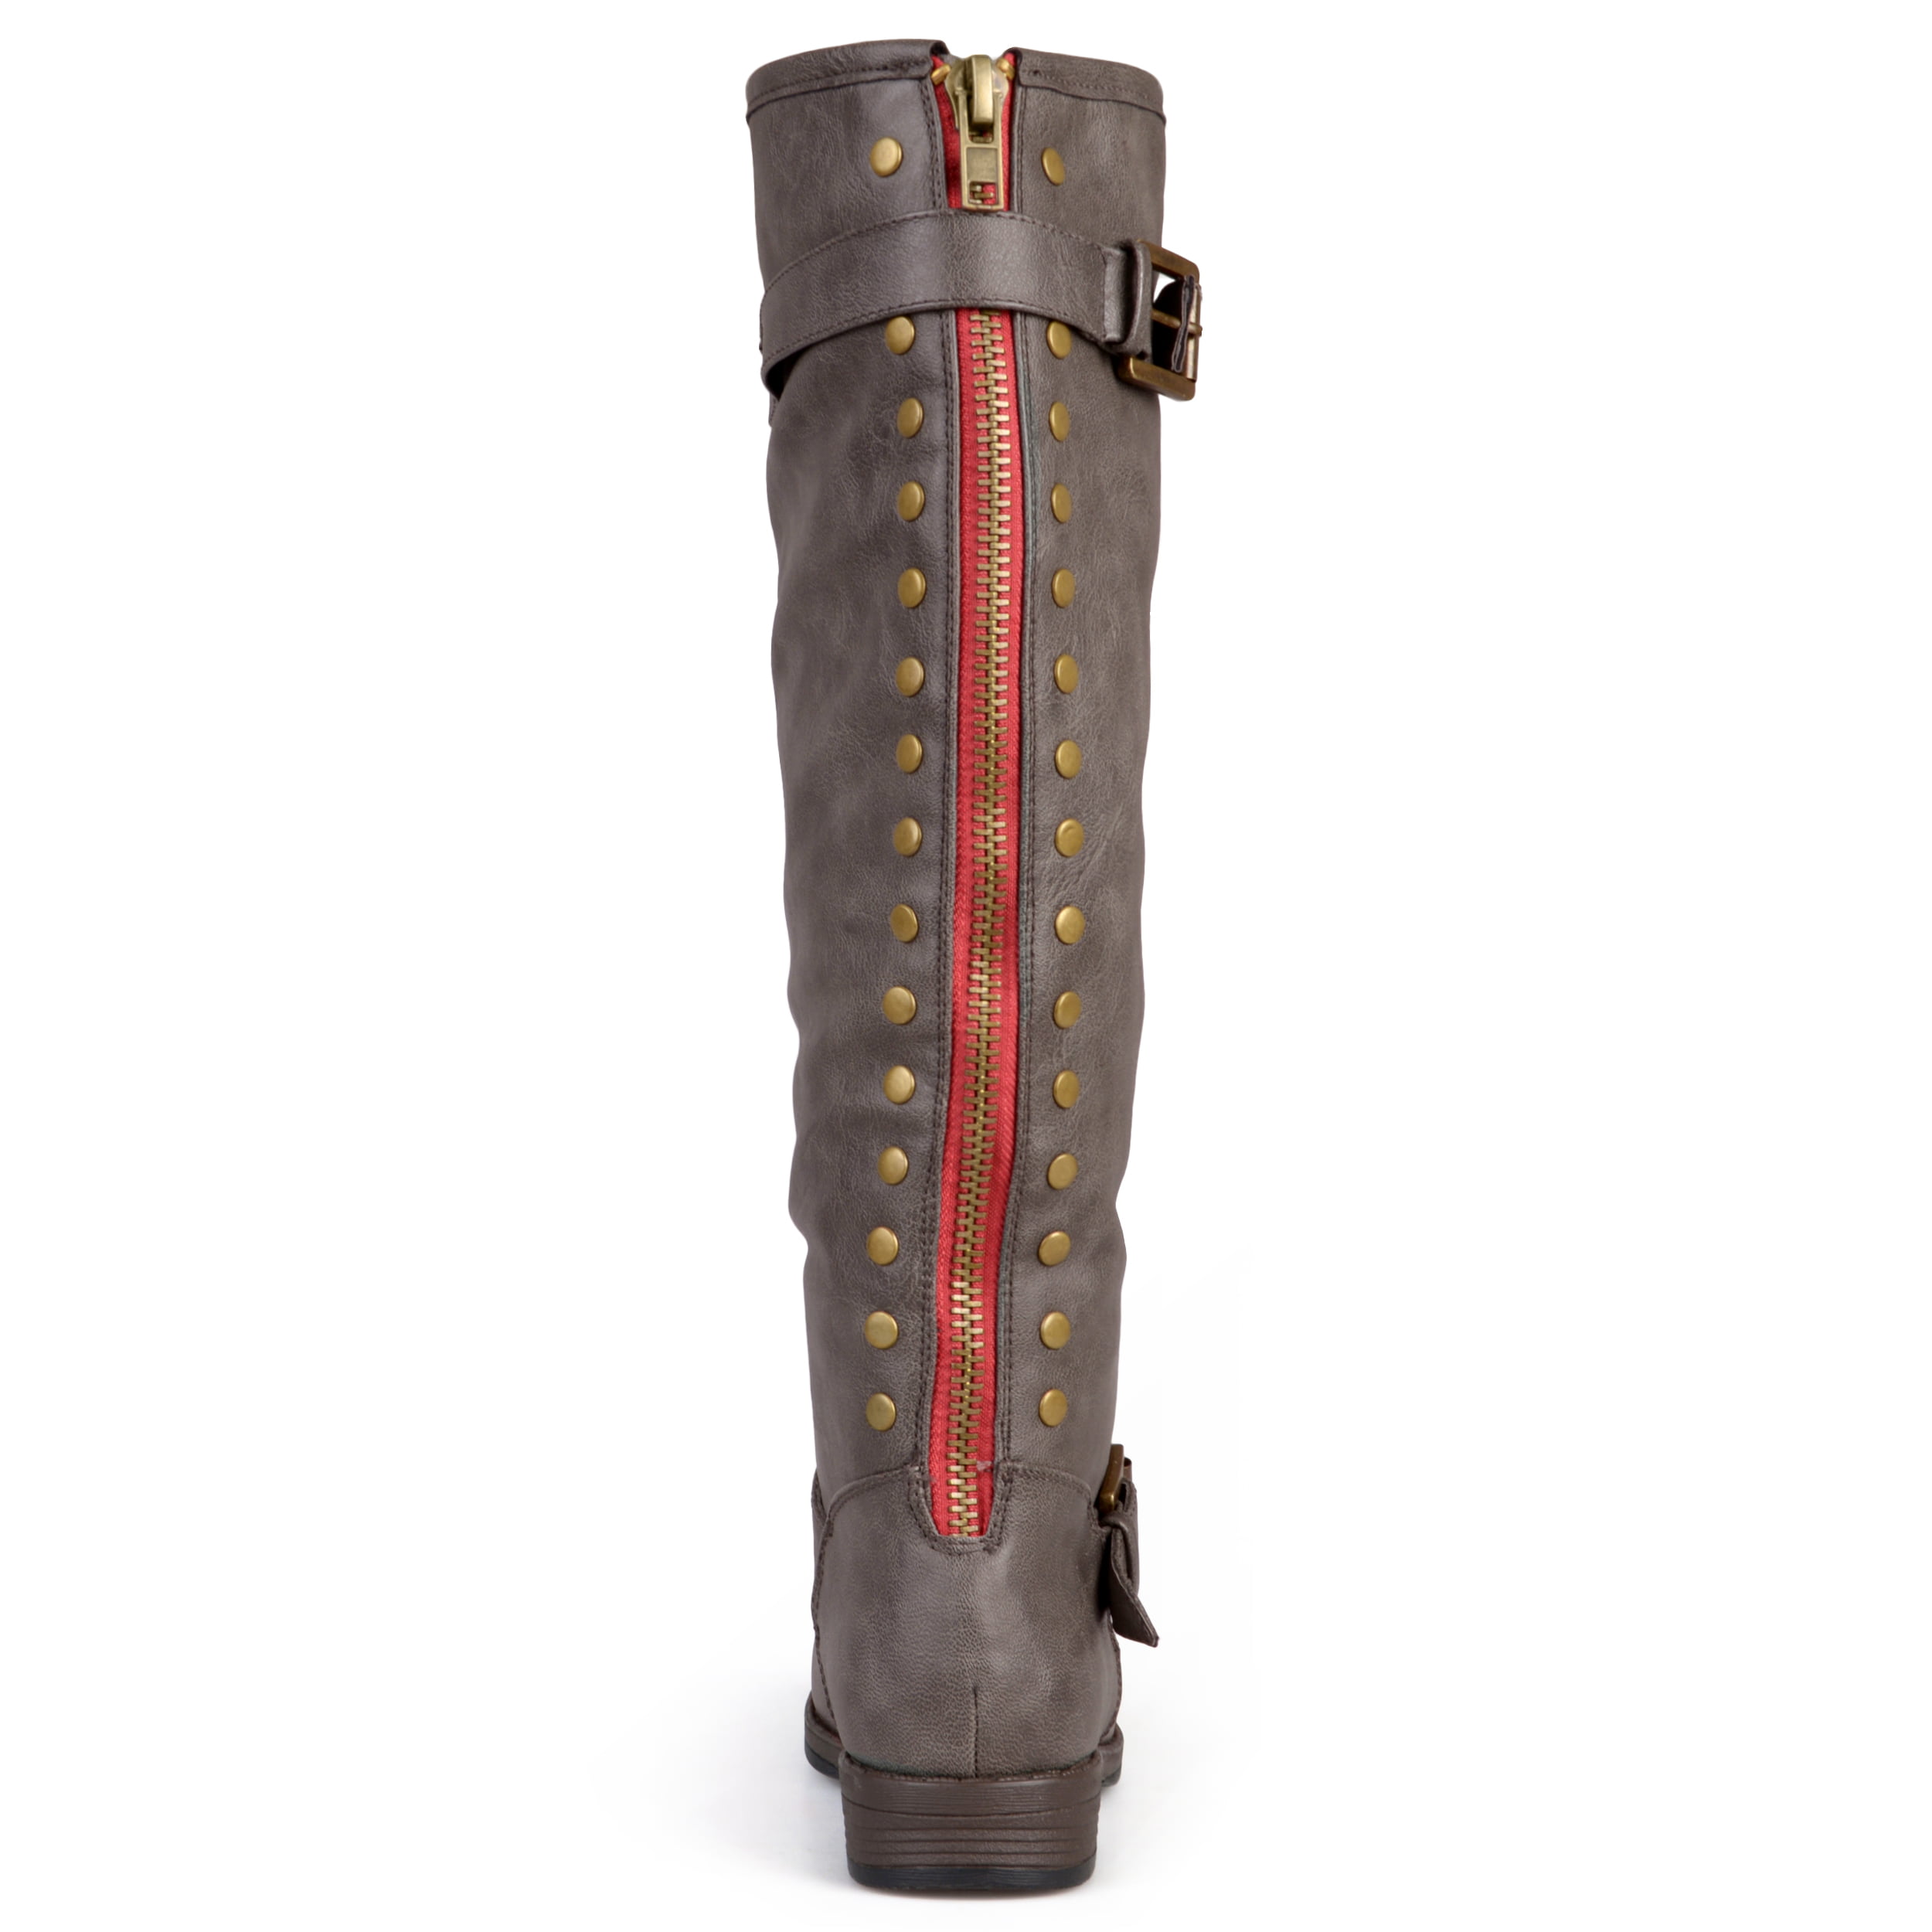 Brinley Co. Women's Extra Wide Calf Knee High Faux Leather Riding